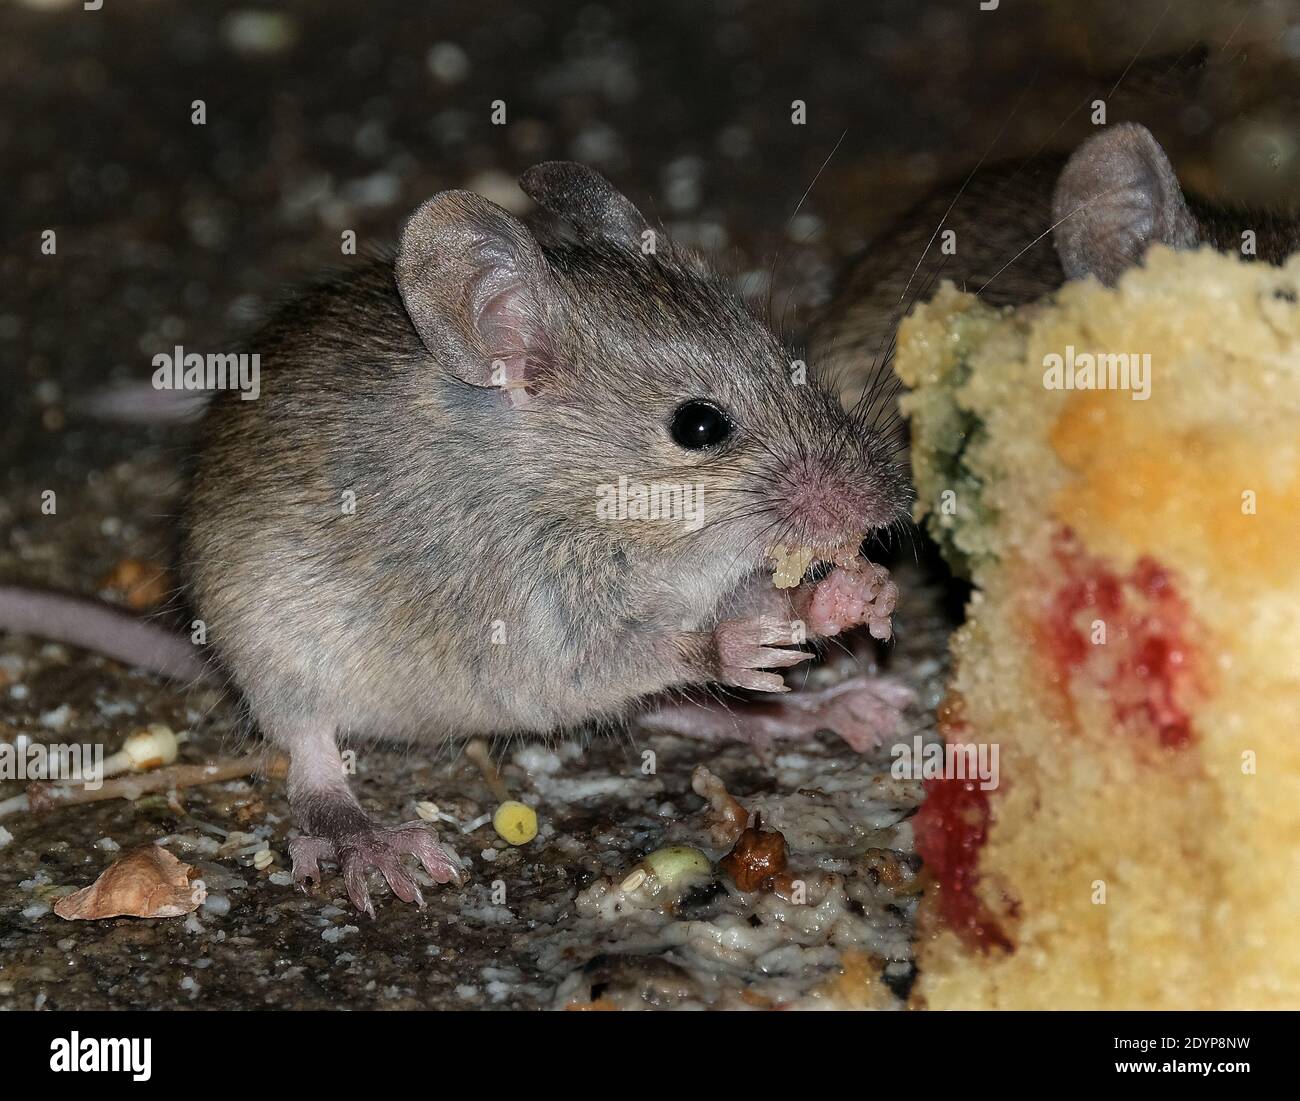 The house mouse is a small mammal of the order Rodentia, characteristically having a pointed snout, large rounded ears, and a long and hairy tail. It Stock Photo